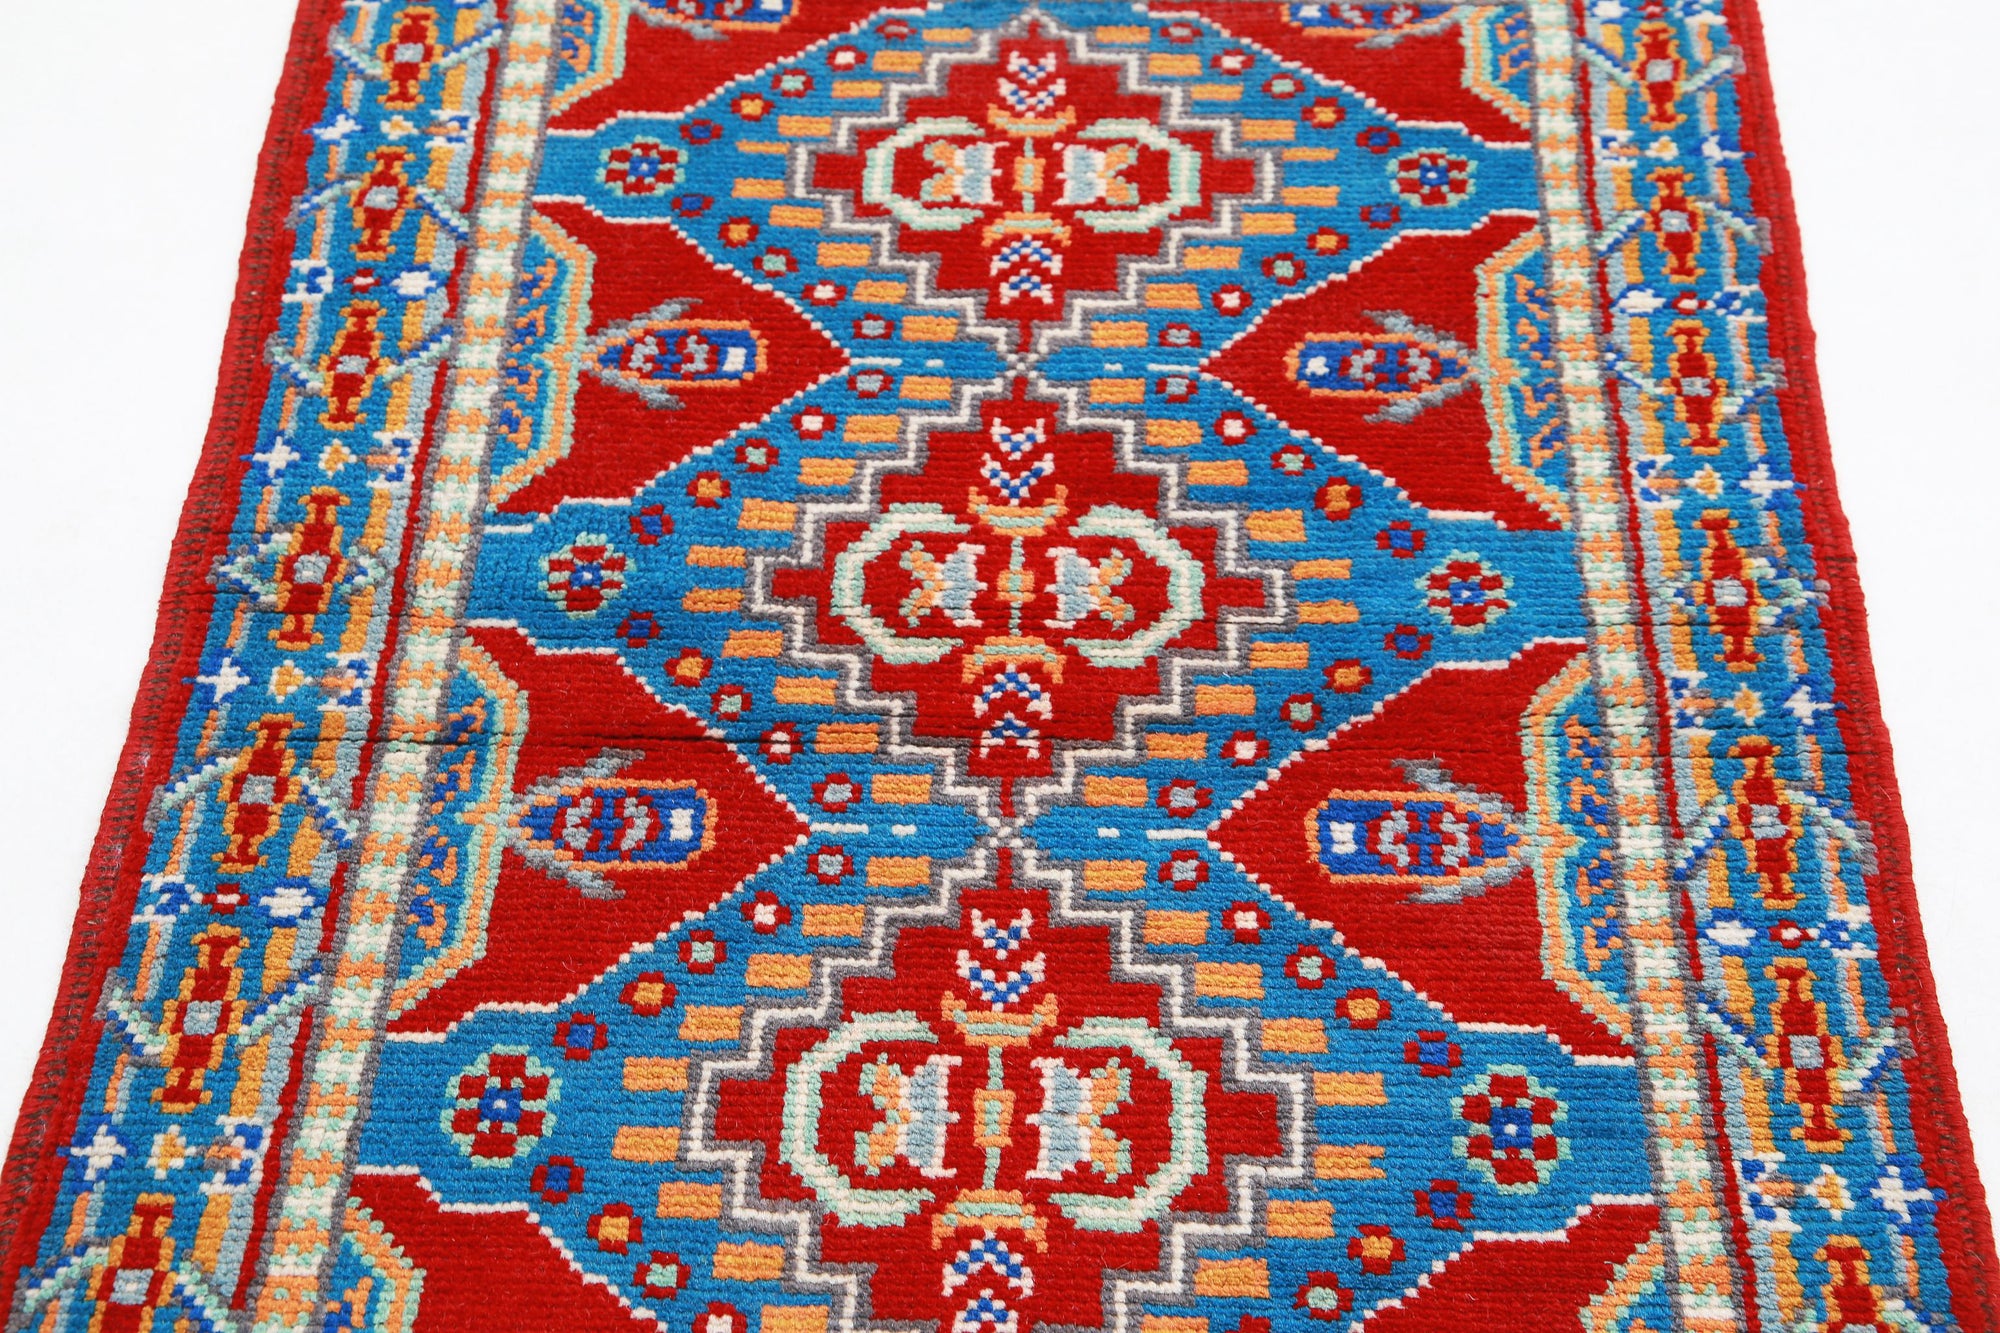 Revival-hand-knotted-qarghani-wool-rug-5014194-4.jpg